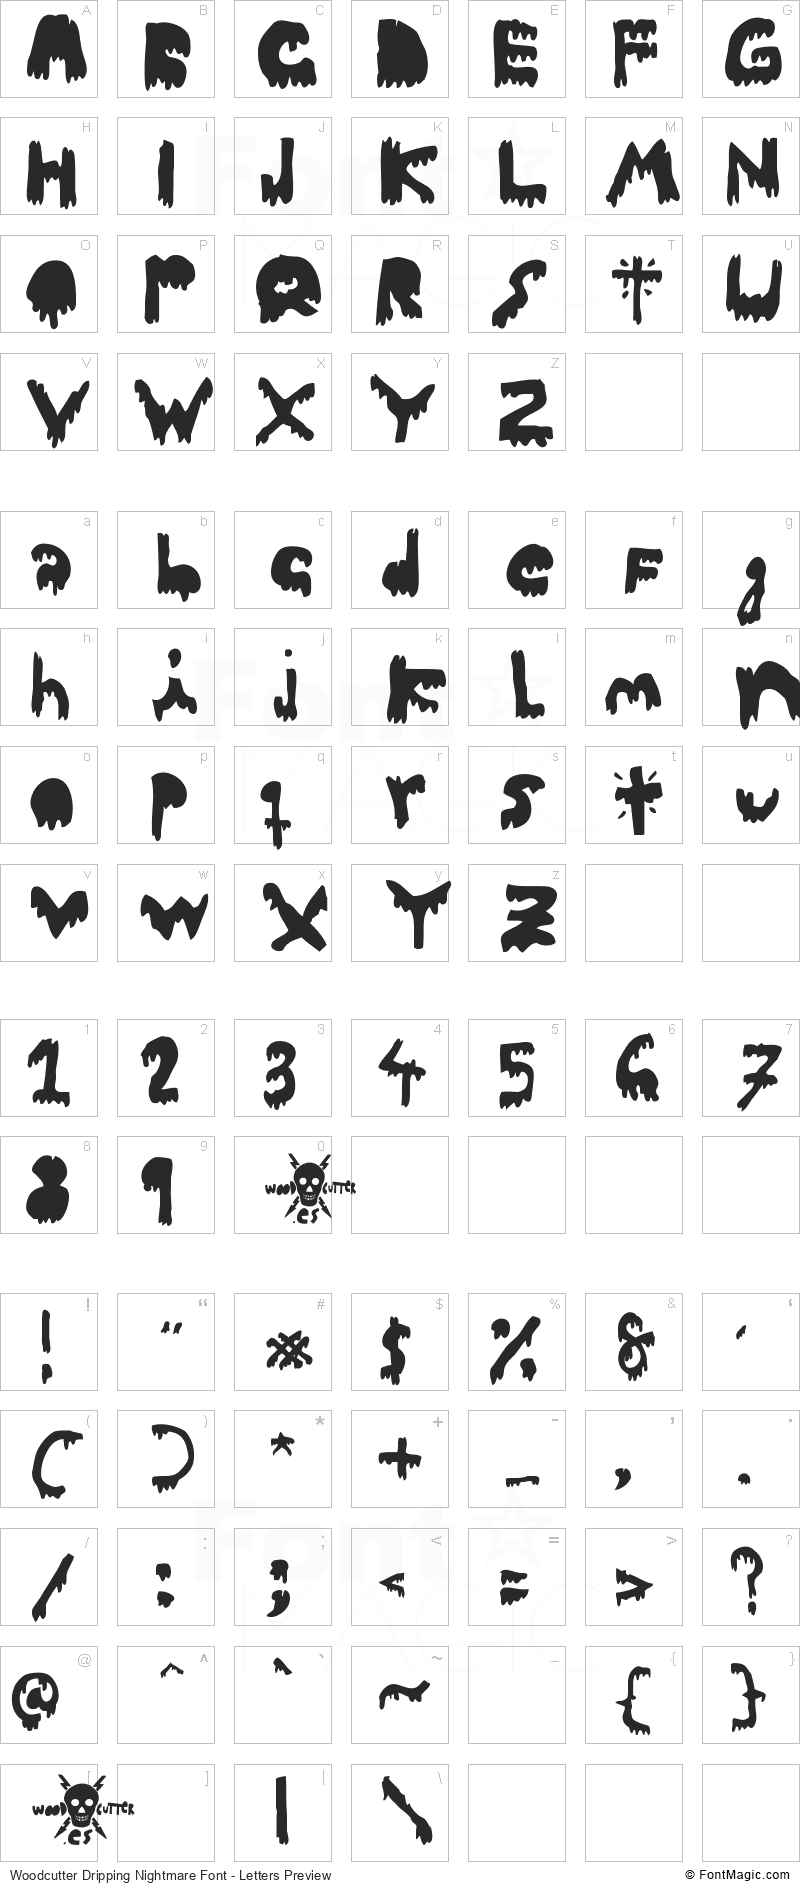 Woodcutter Dripping Nightmare Font - All Latters Preview Chart